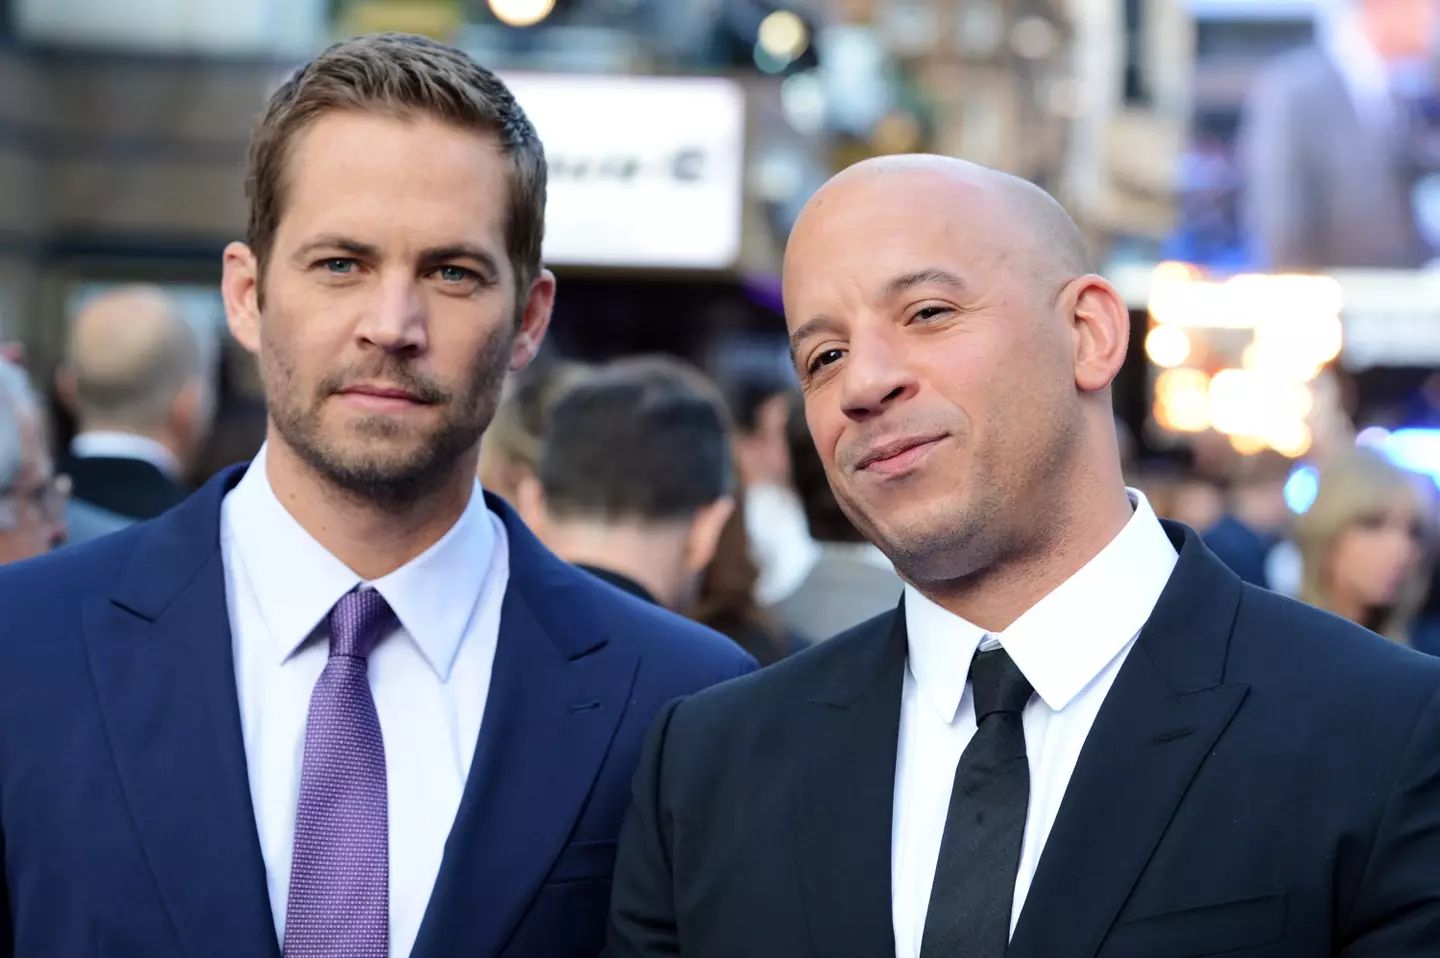 Paul Walker is best known for his role in the Fast and Furious franchise.